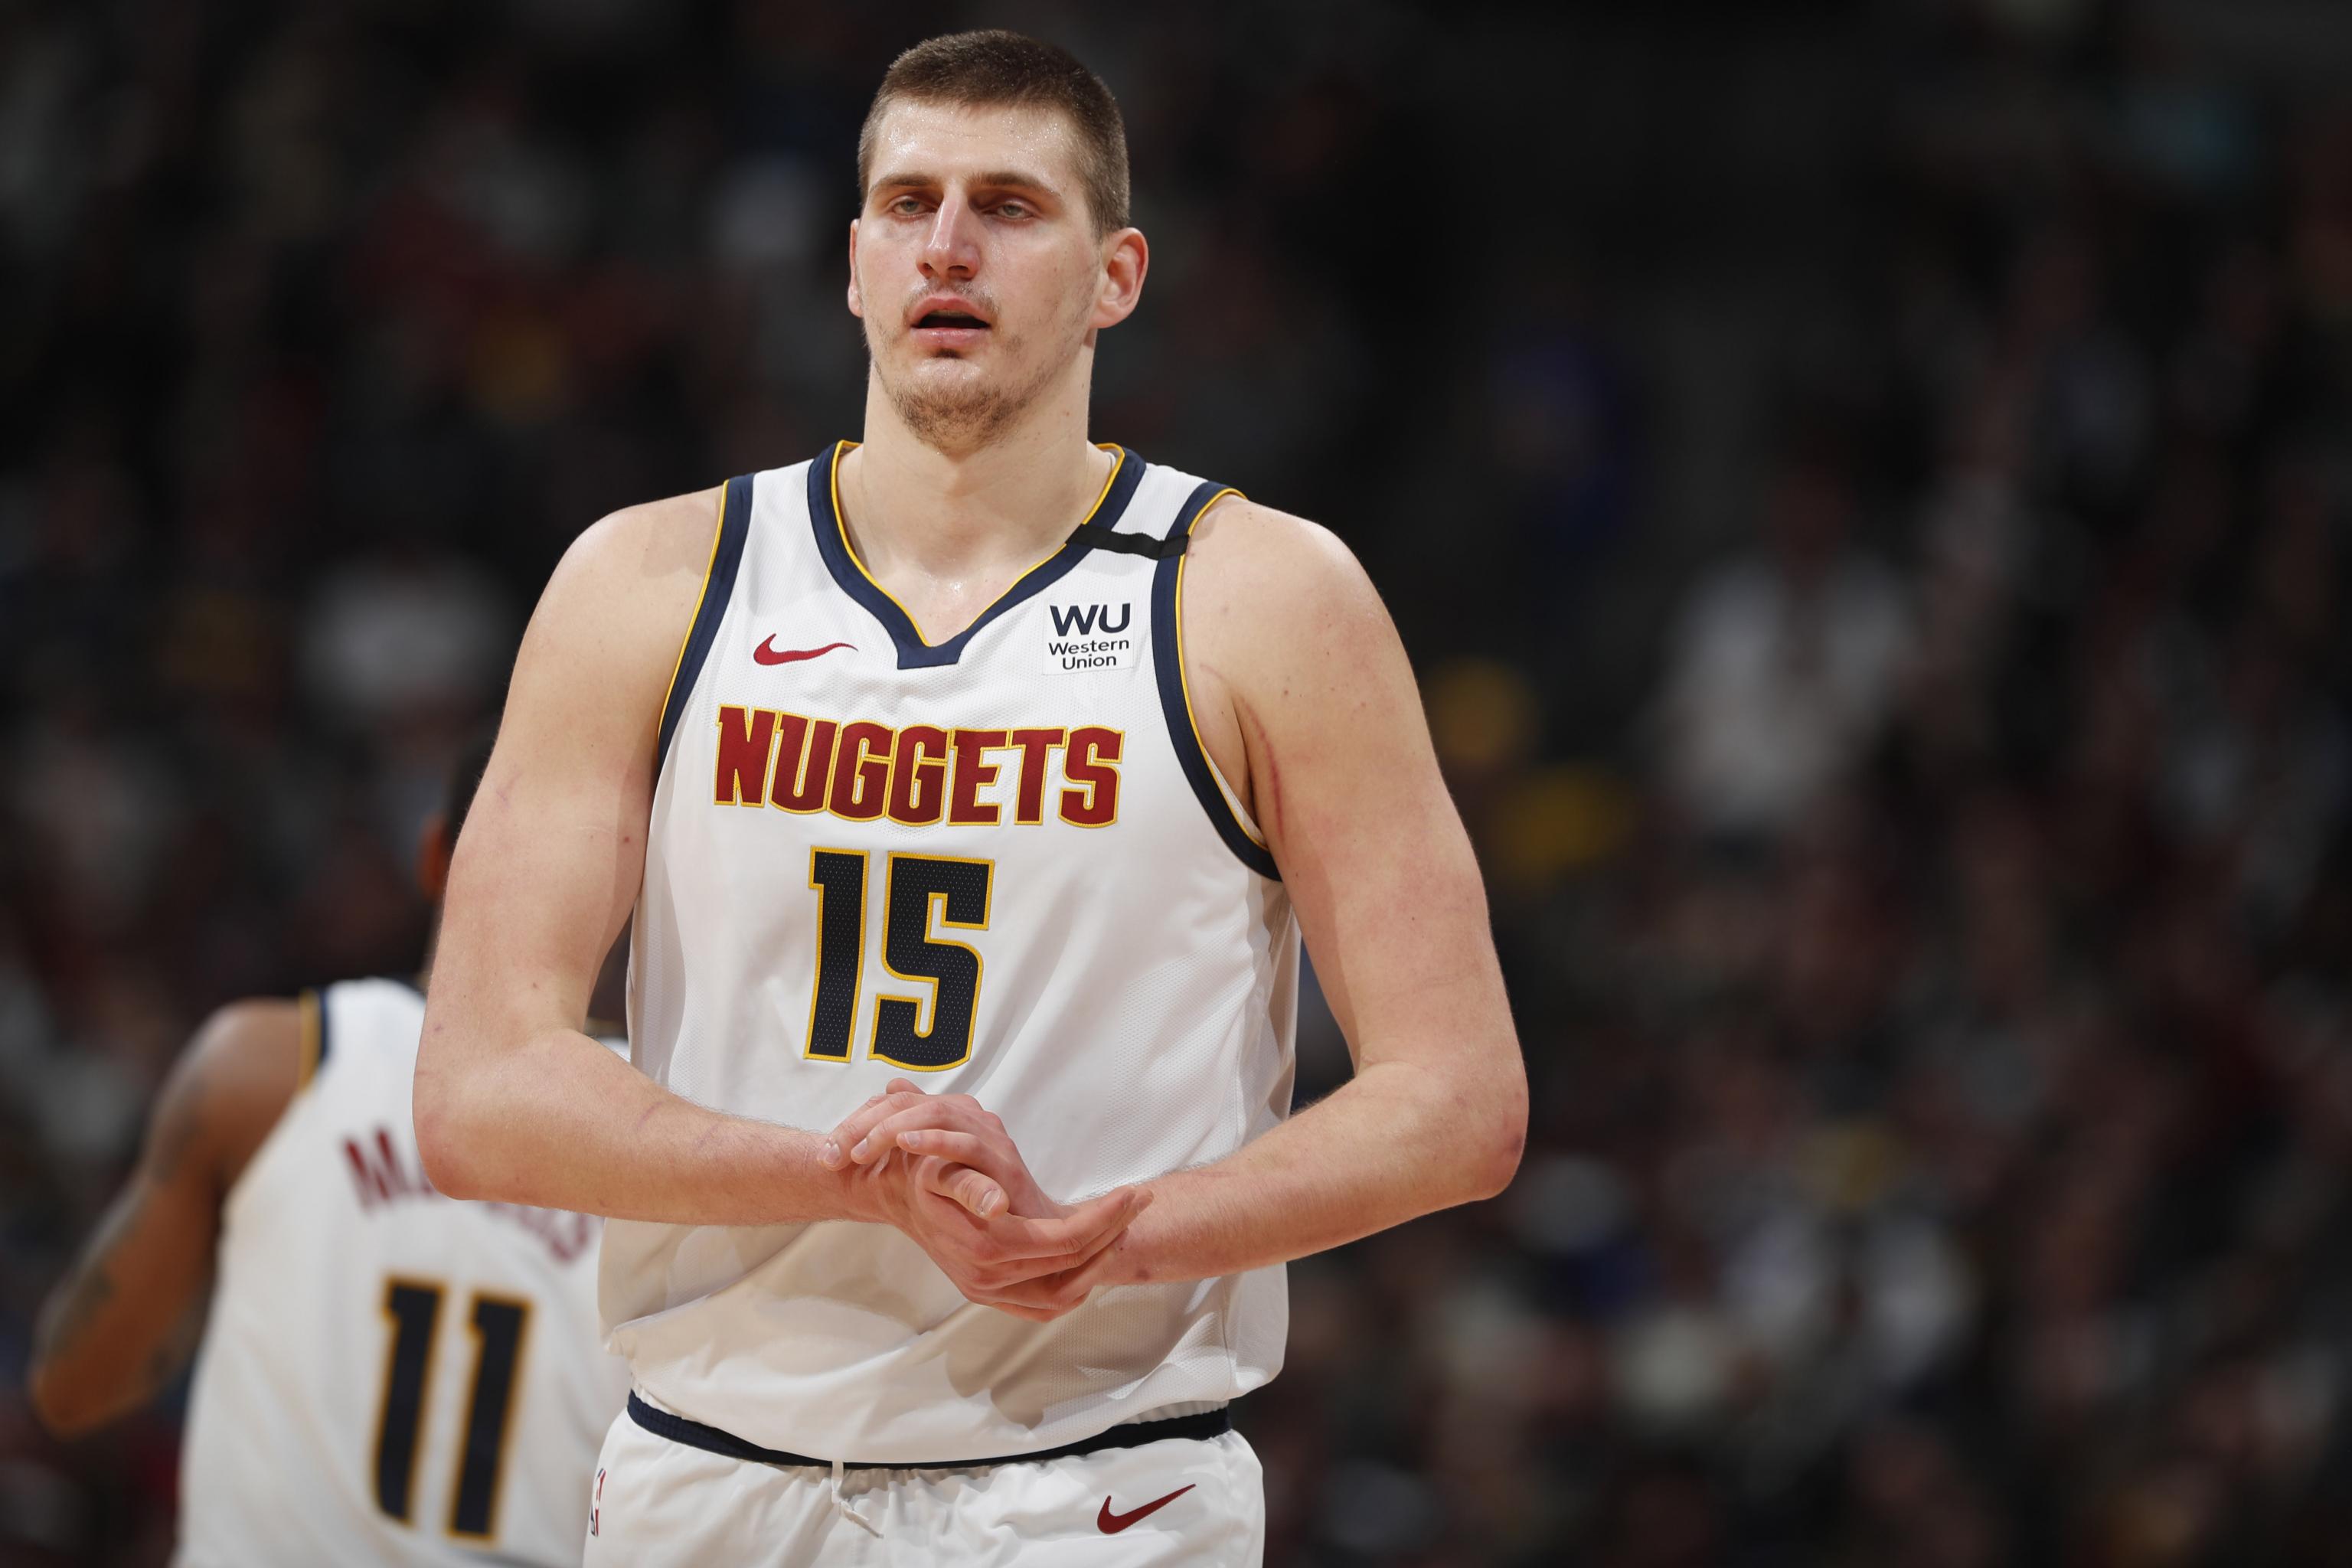 Nuggets Nikola Jokic Shows Slimmed Down Physique Before Nba Season Restarts Bleacher Report Latest News Videos And Highlights